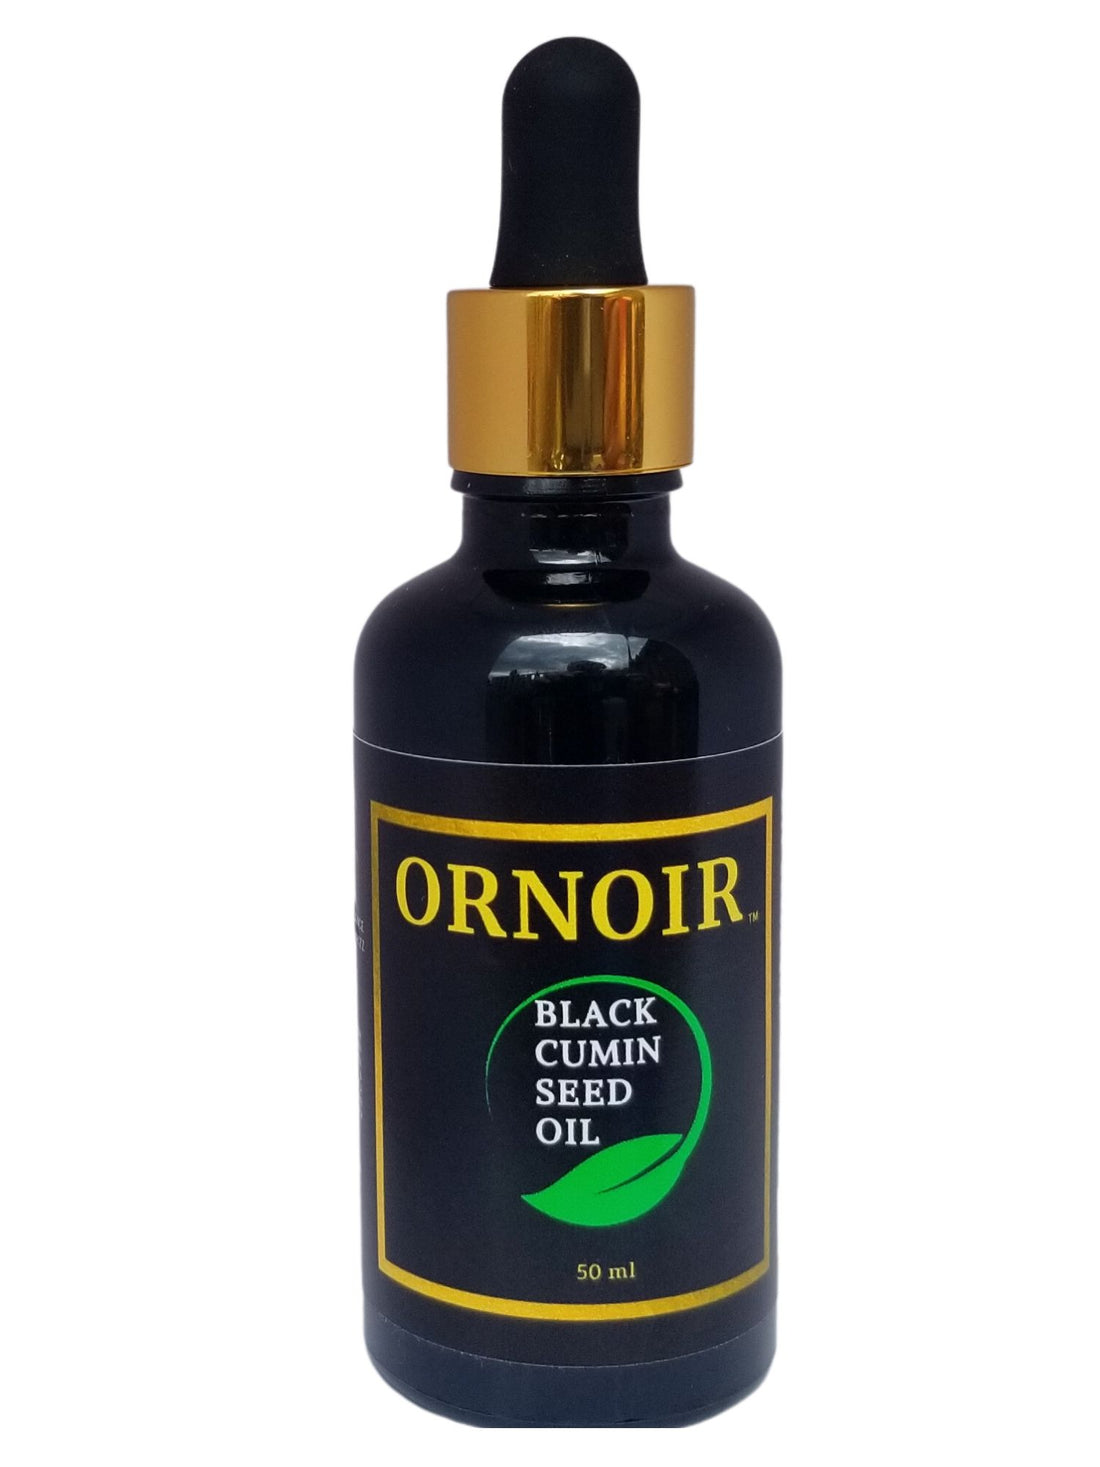 Ornoir Black Cumin Seed Oil, Organic 100% Pure and Natural, Vegan, Soothing, for Skin Health, Cuts, Wounds, Rashes, Irritation and also for Overall Hair &amp; Scalp Health